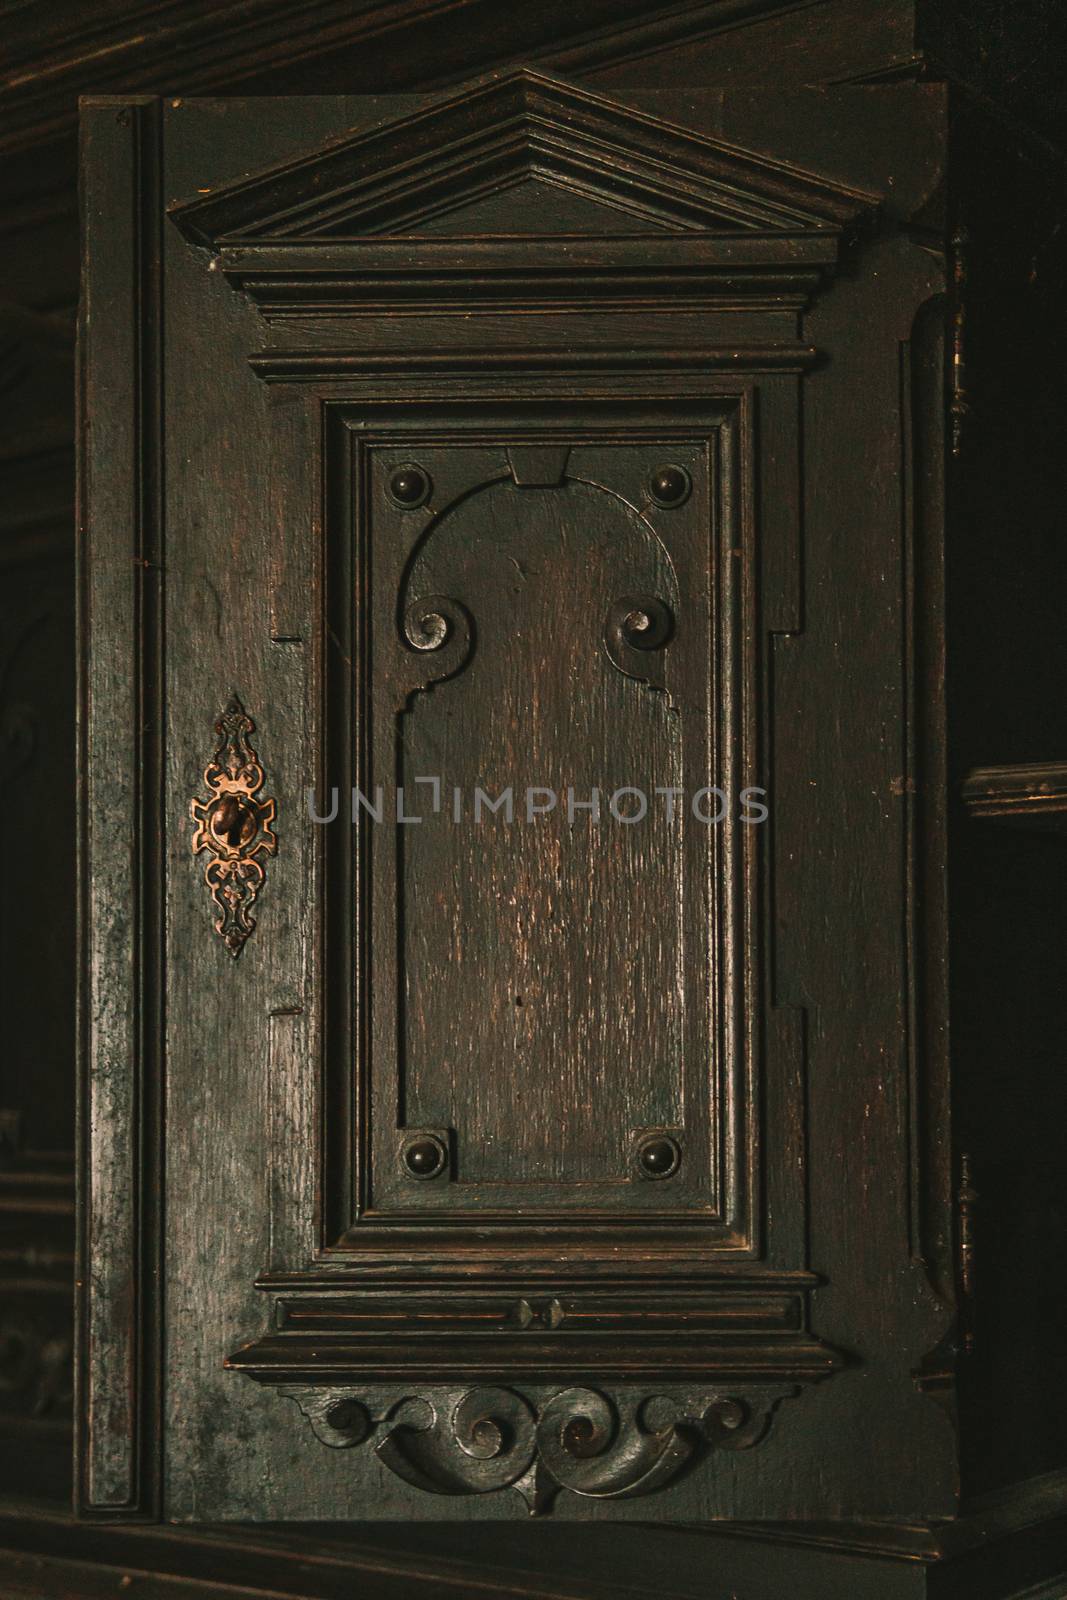 An old abandoned manor house with antique furniture and wonderful architecture by mindscapephotos